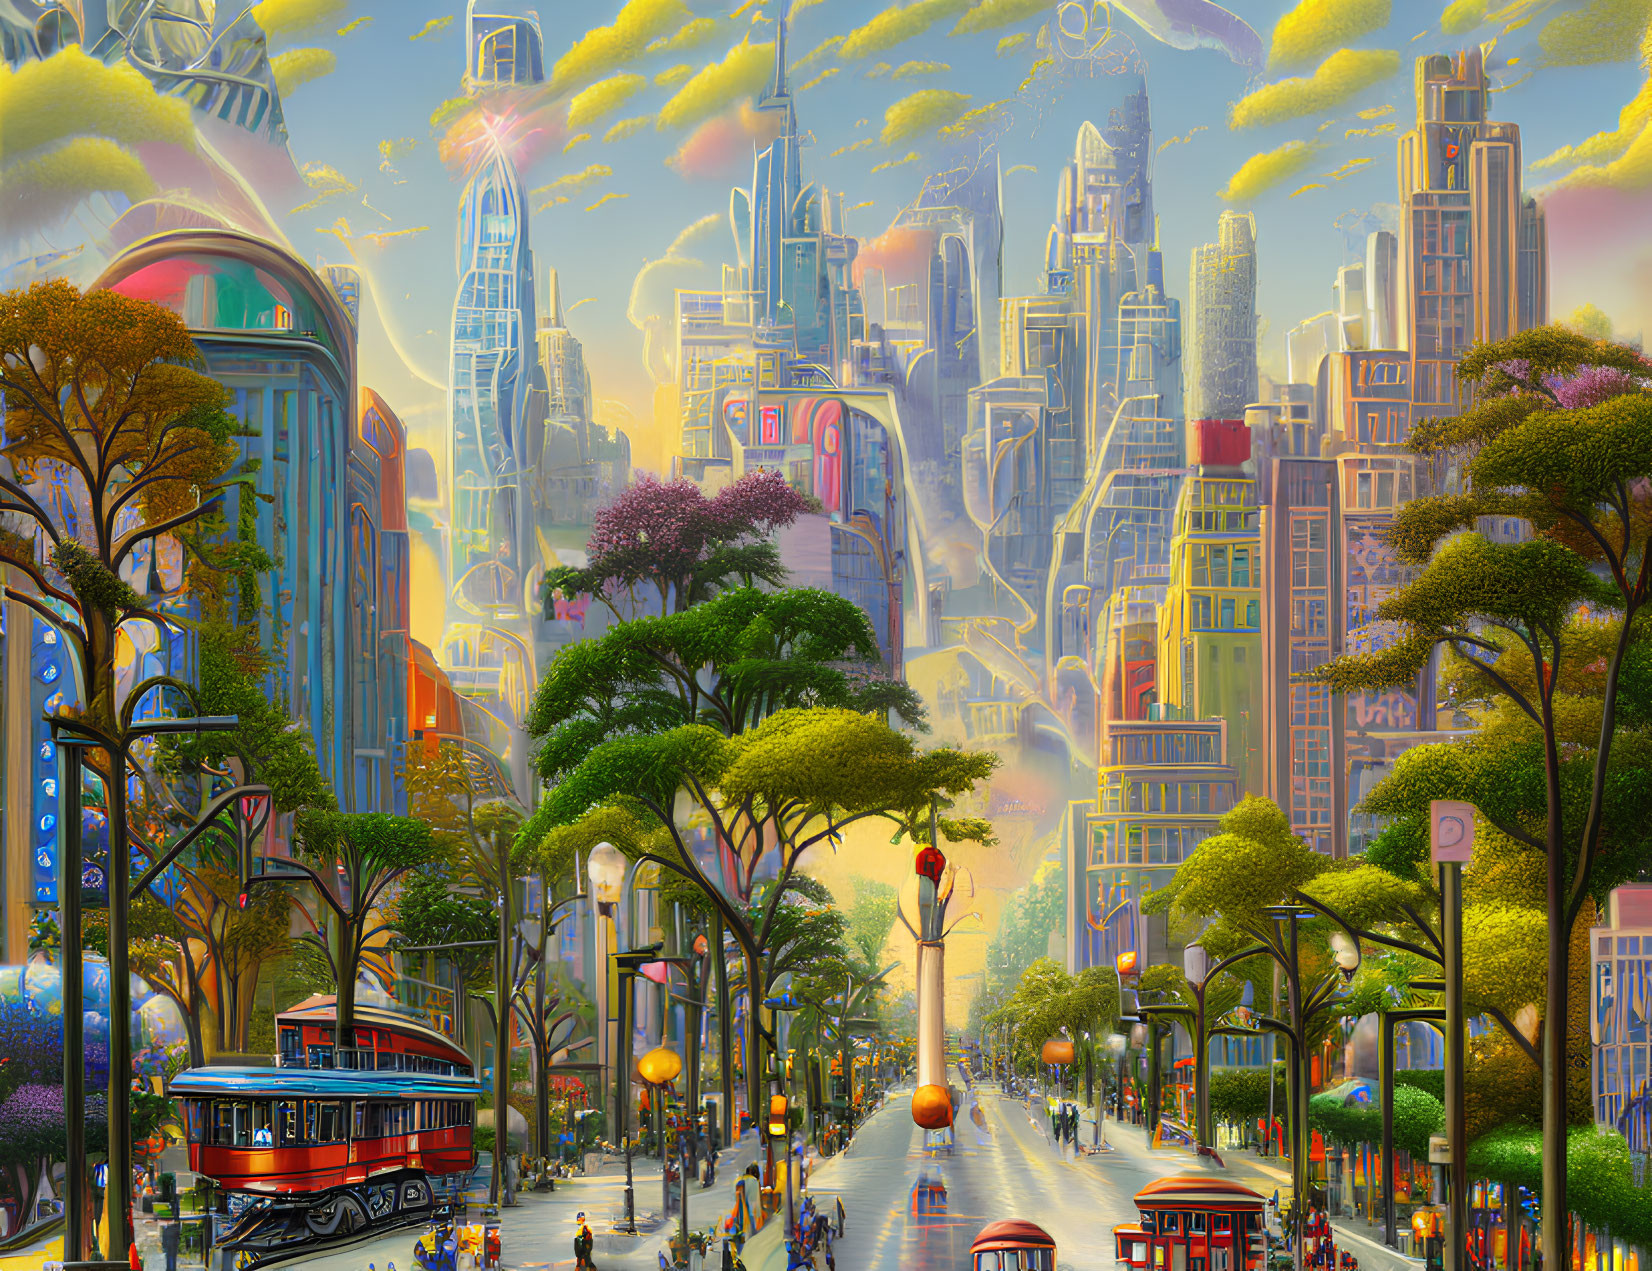 Futuristic cityscape with skyscrapers, greenery, boulevard, and tram